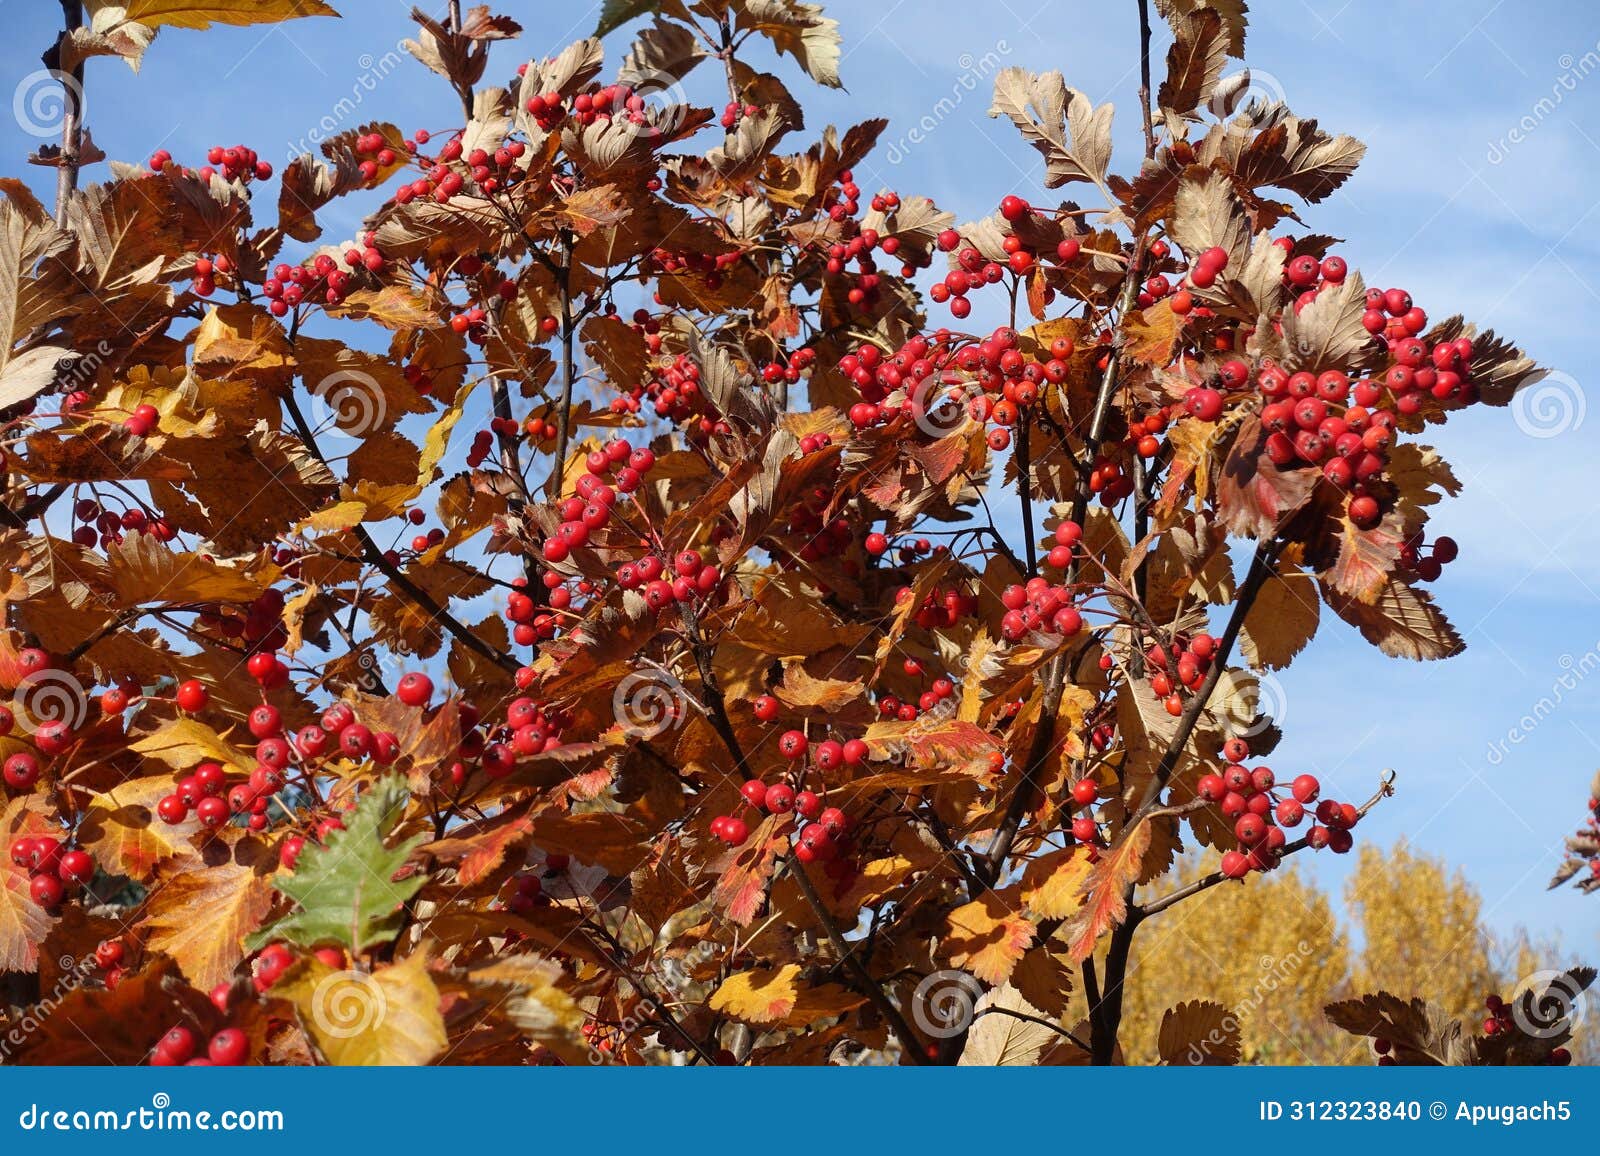 brownish yellow foliage and red fruits of sorbus aria against blue sky